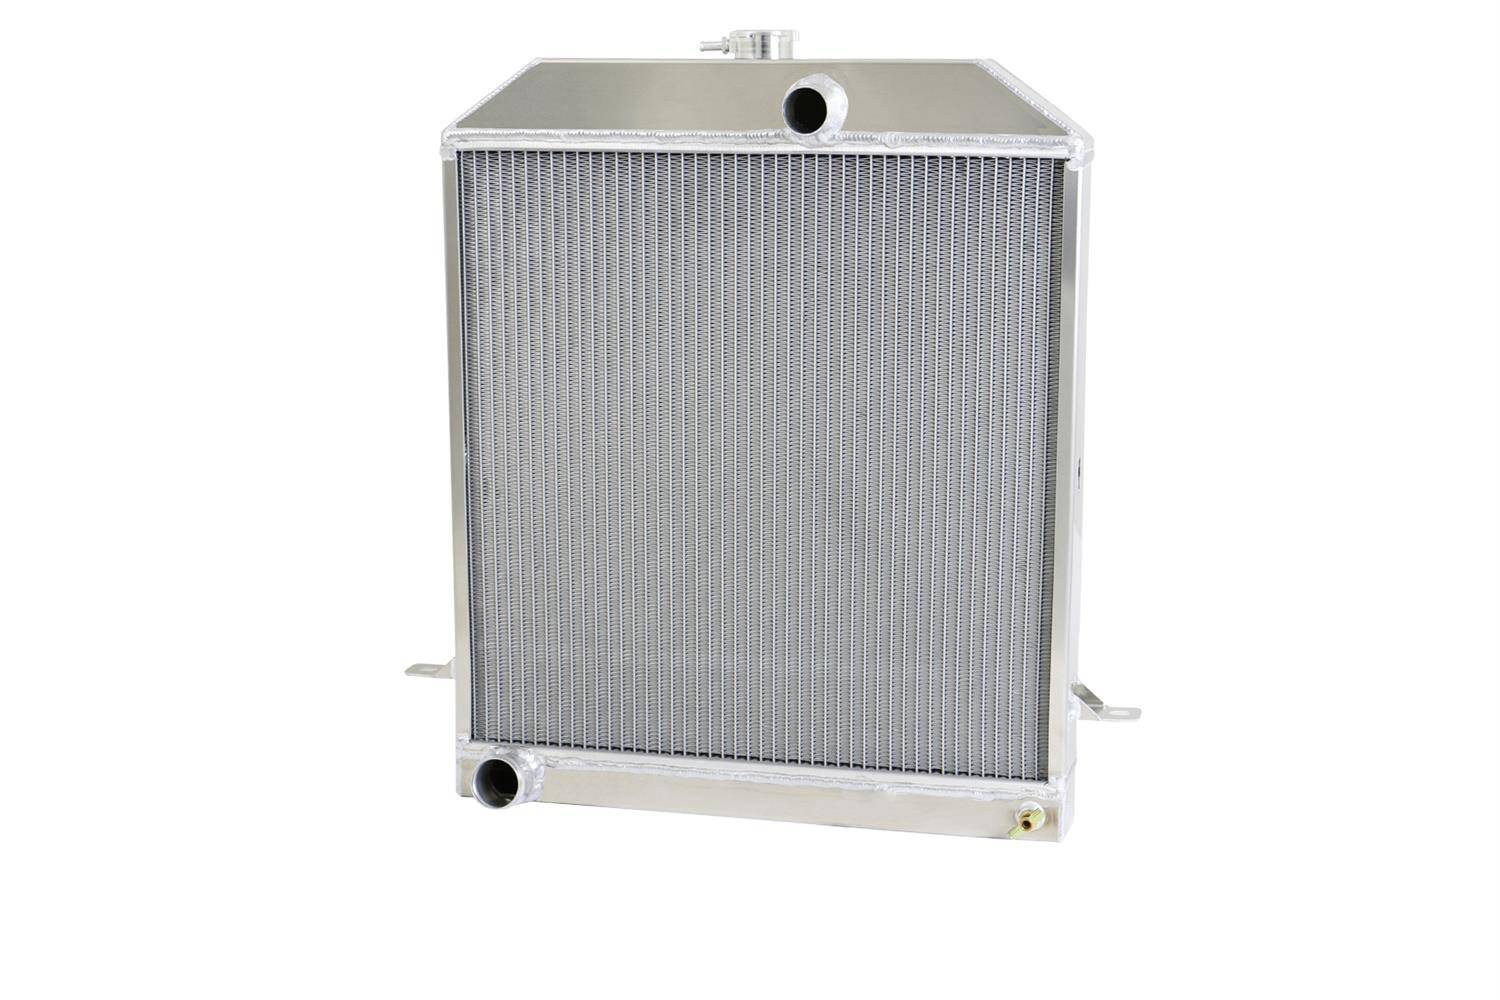 Wizard Cooling Inc - Wizard Cooling - 1940-1941 Ford Truck & 1939-1941 Car Aluminum Radiator - 98517-200